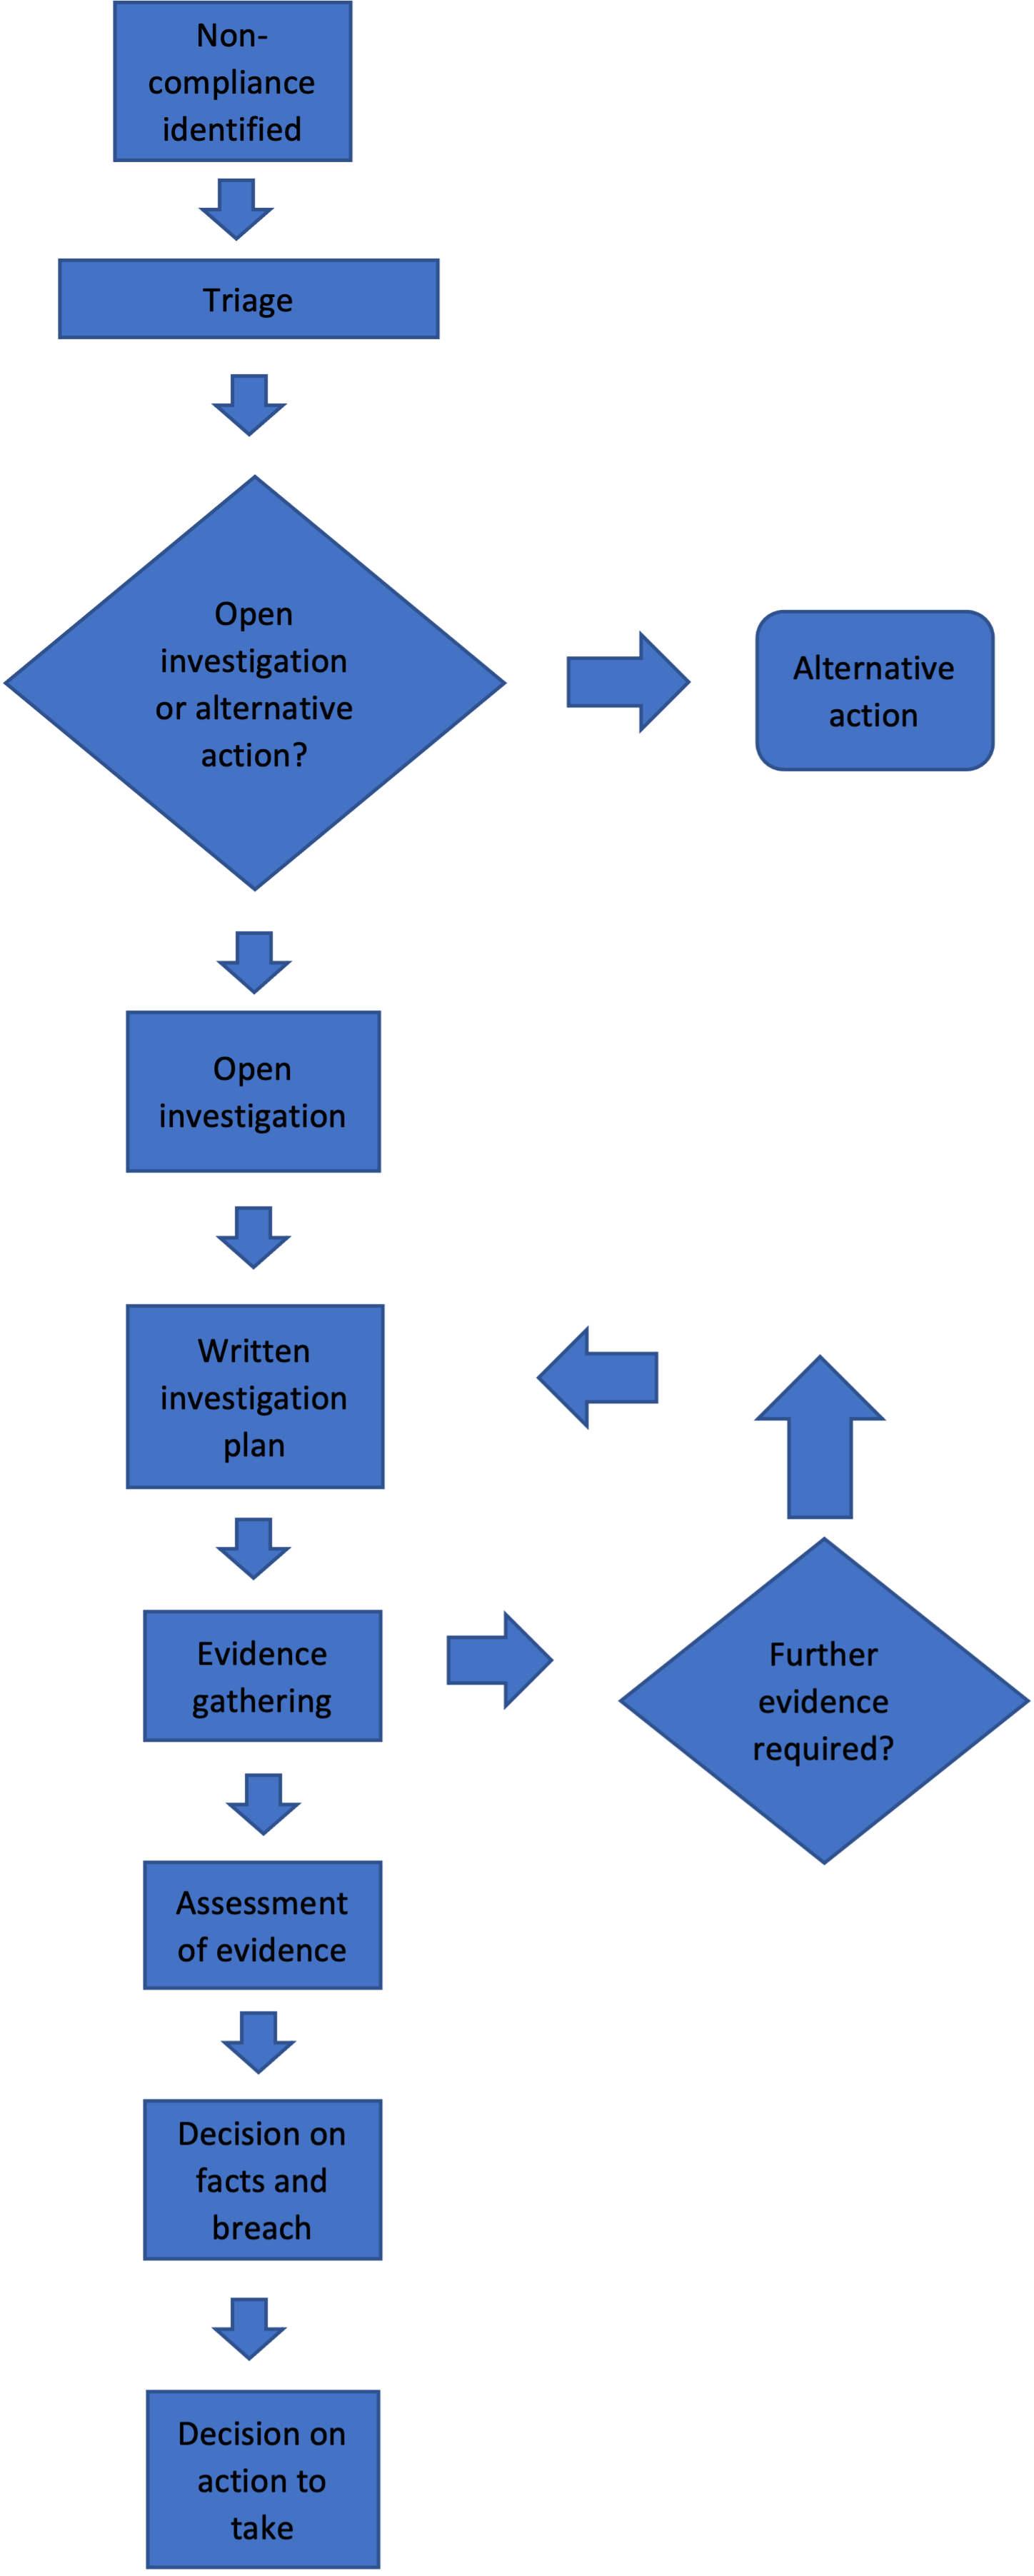 Non-compliance identified flow chart